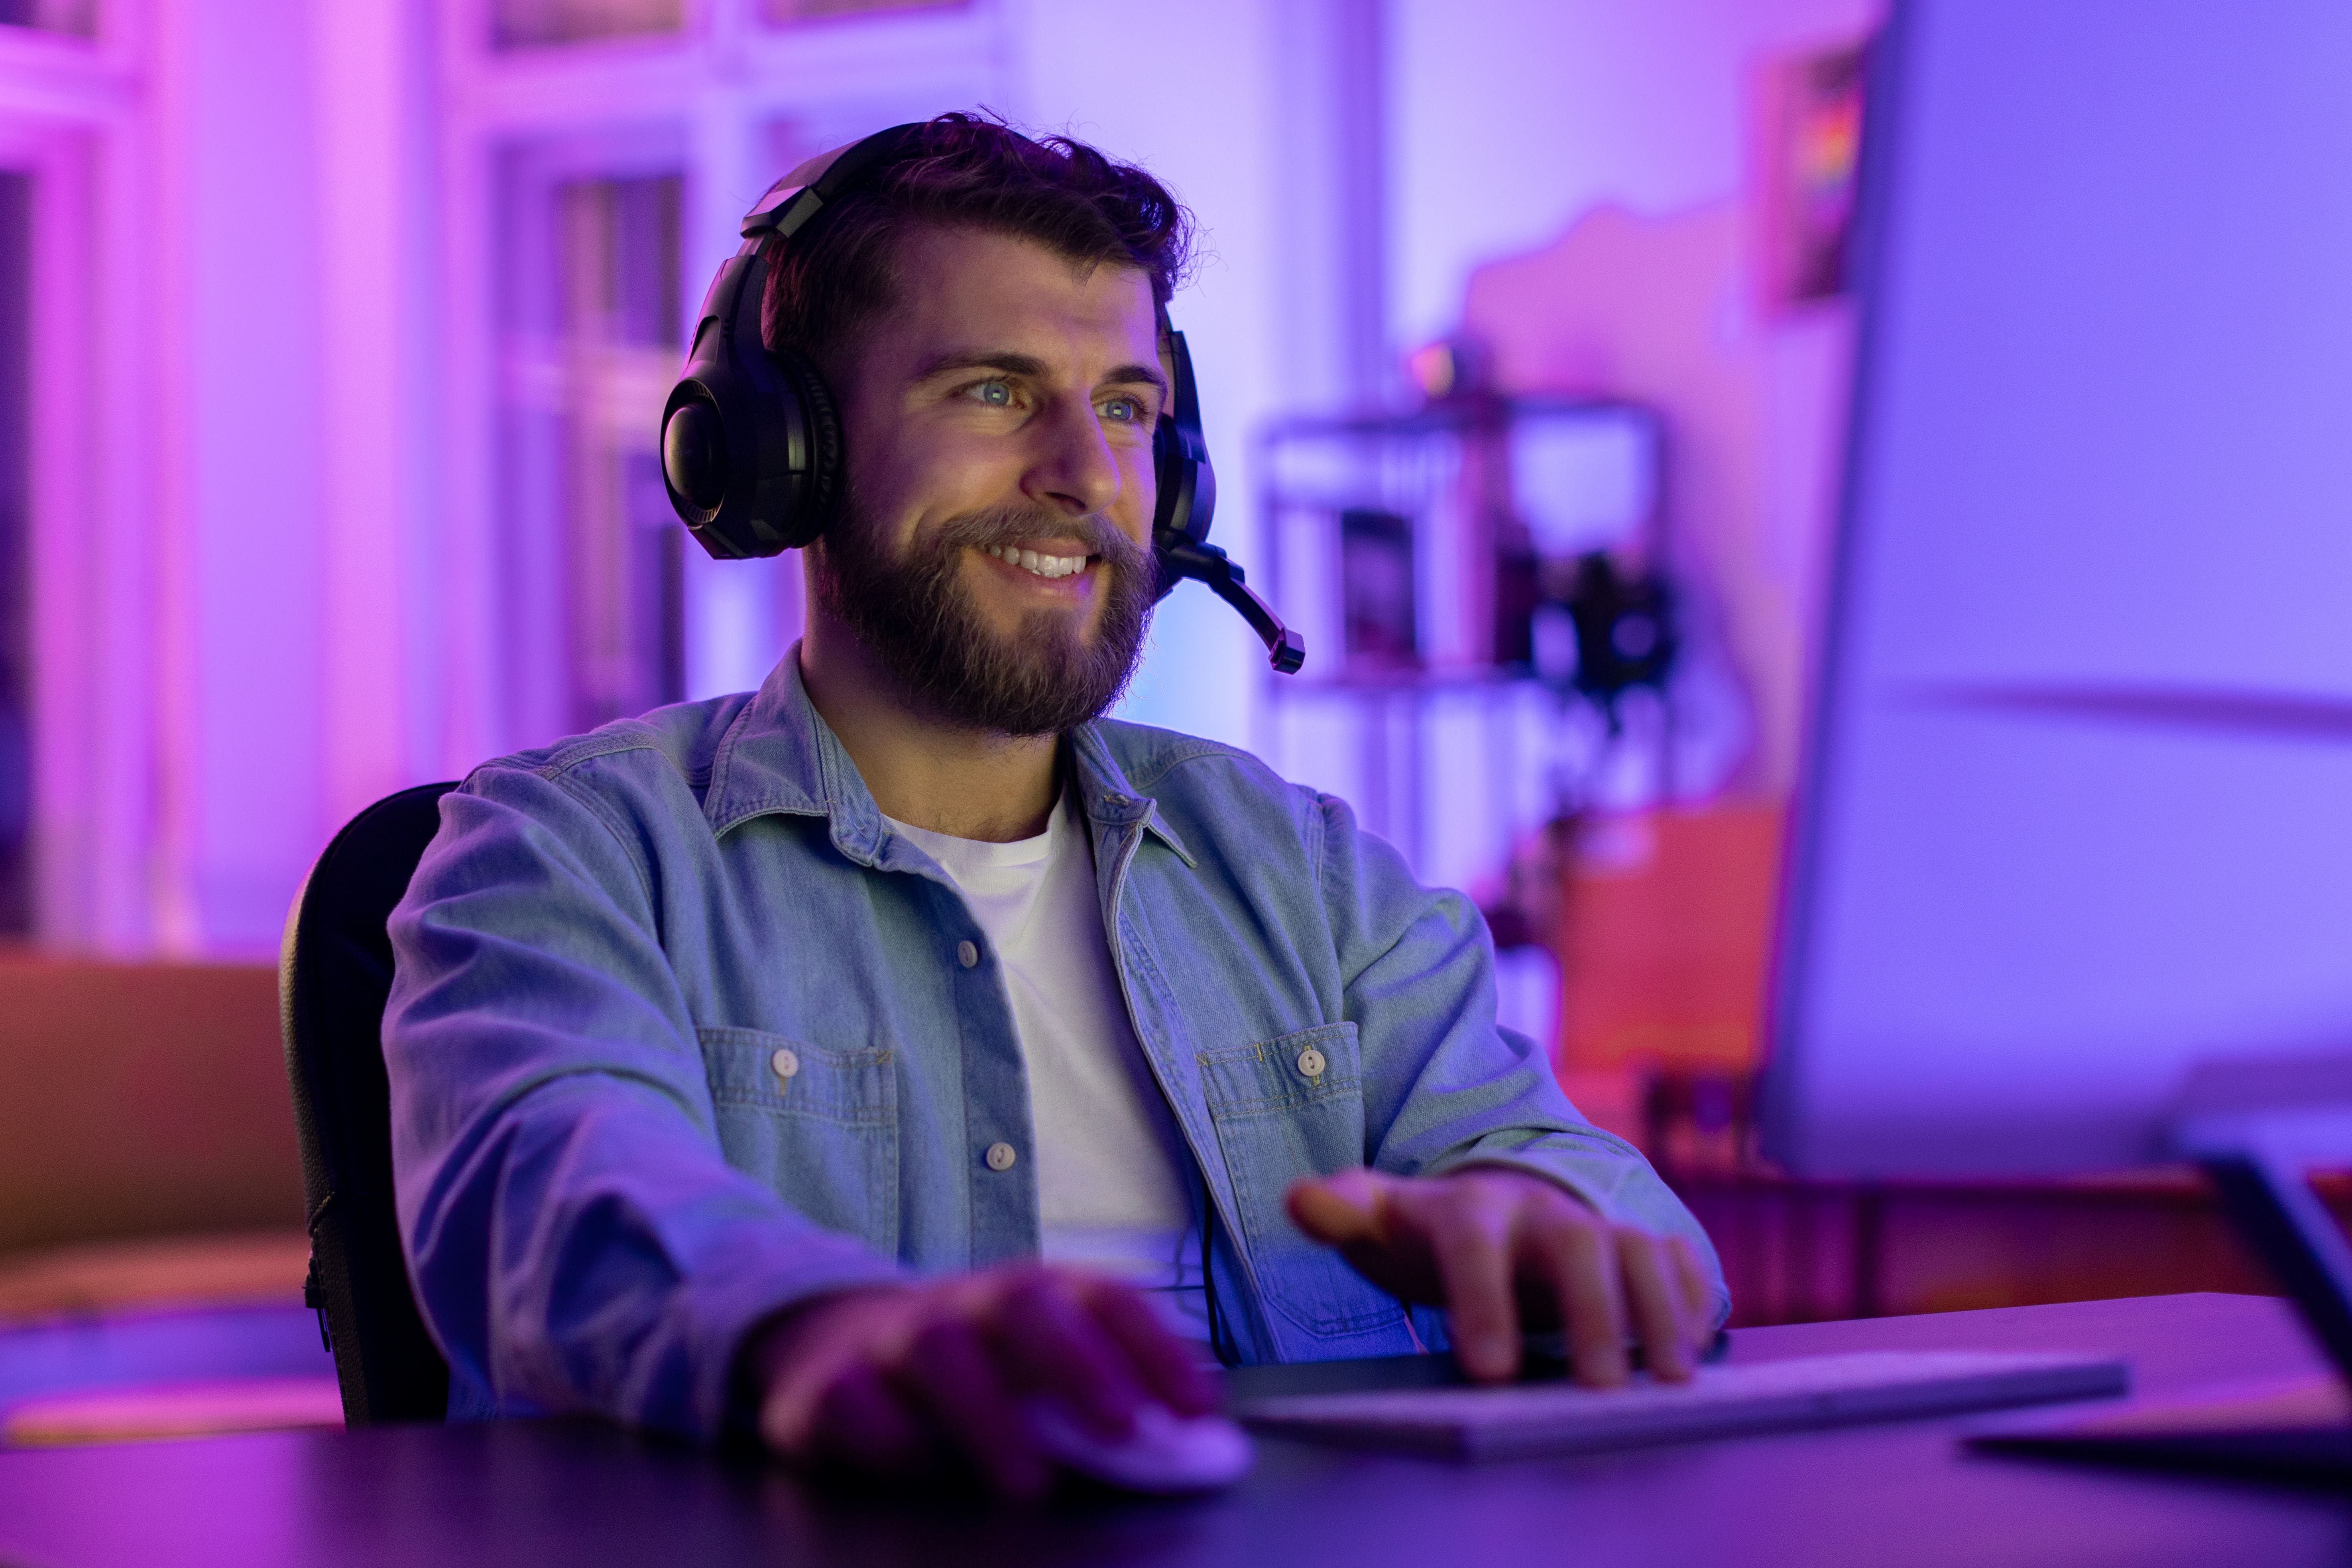 A man enjoying his in-game experience with ambient lighting to enhance his surroundings and a headset so that he is acoustically immersed in the action